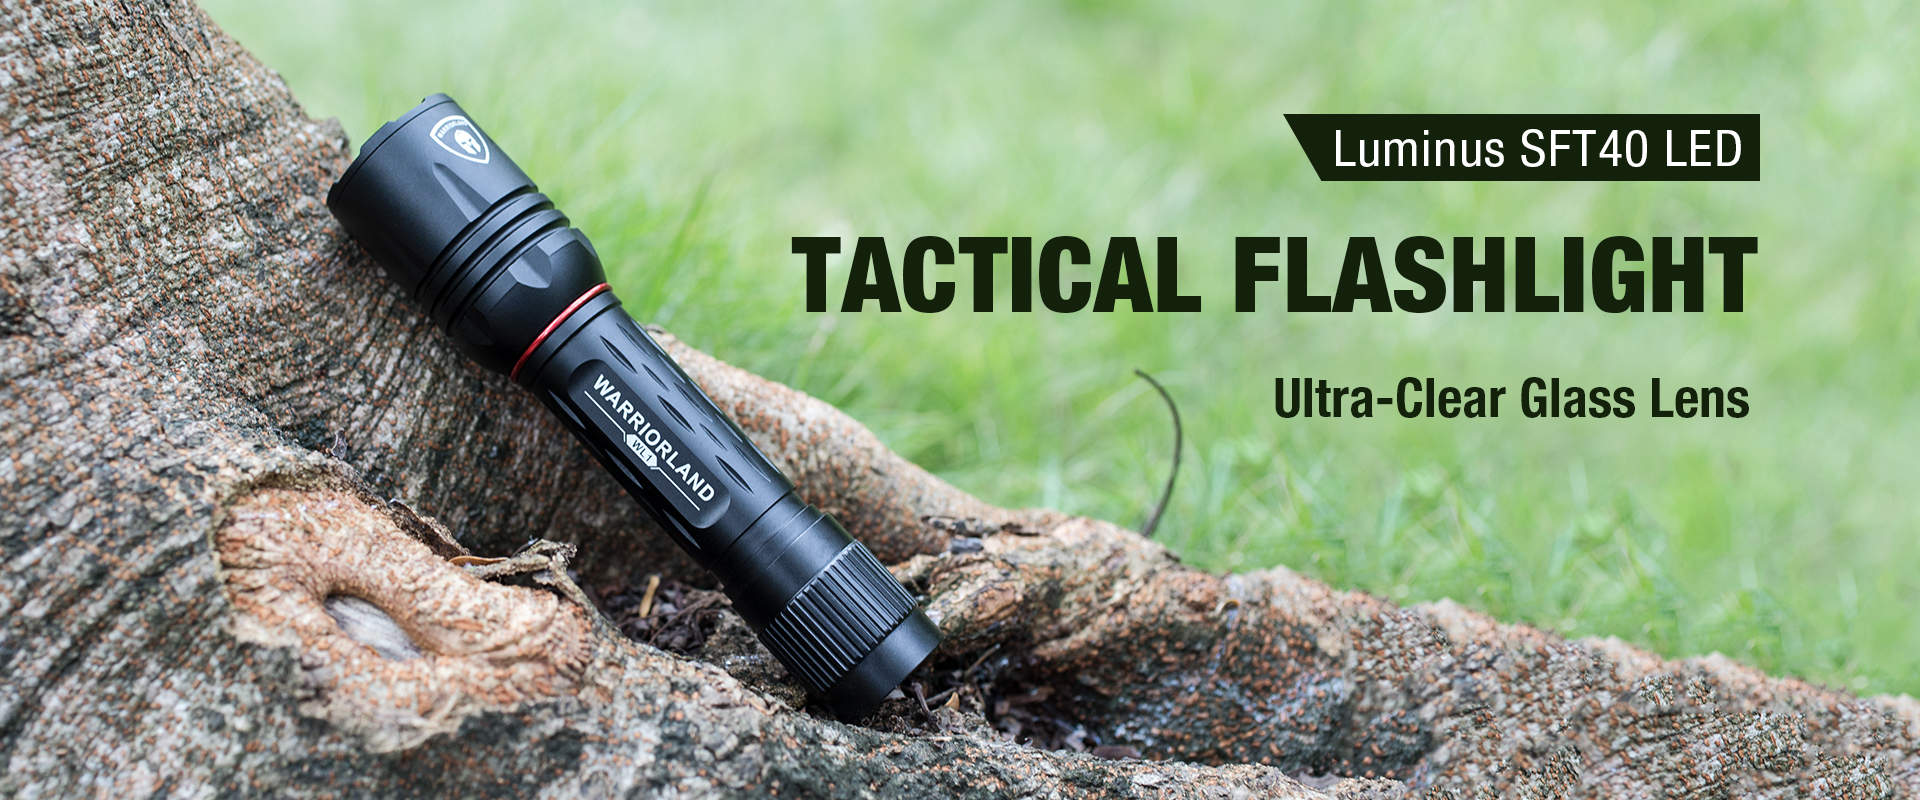 What Is The Difference Between A Tactical Flashlight And An Ordinary Flashlight?